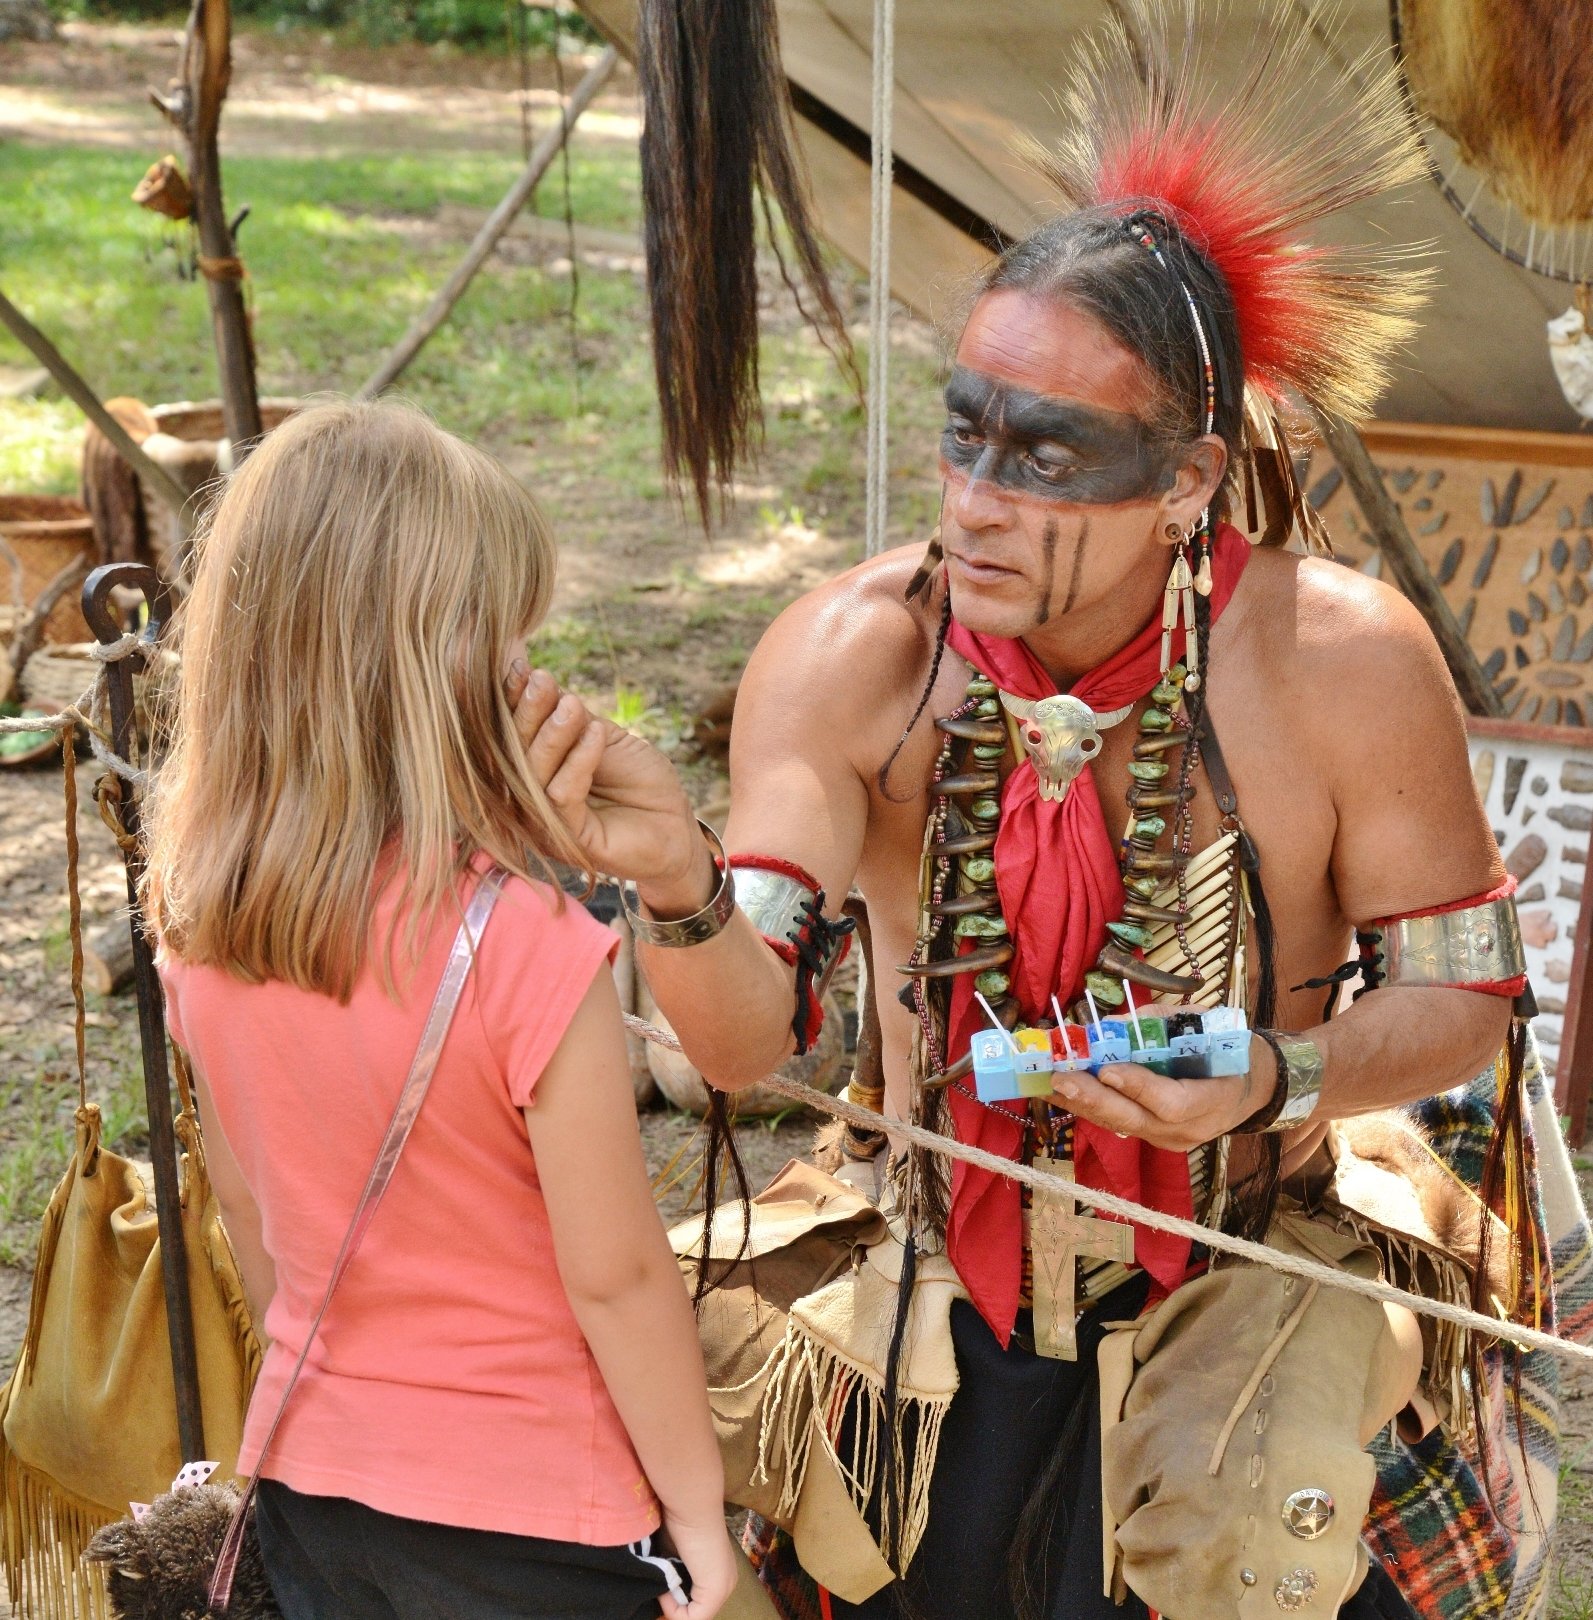 Living history demonstration at the Ocmulgee Indian Celebration